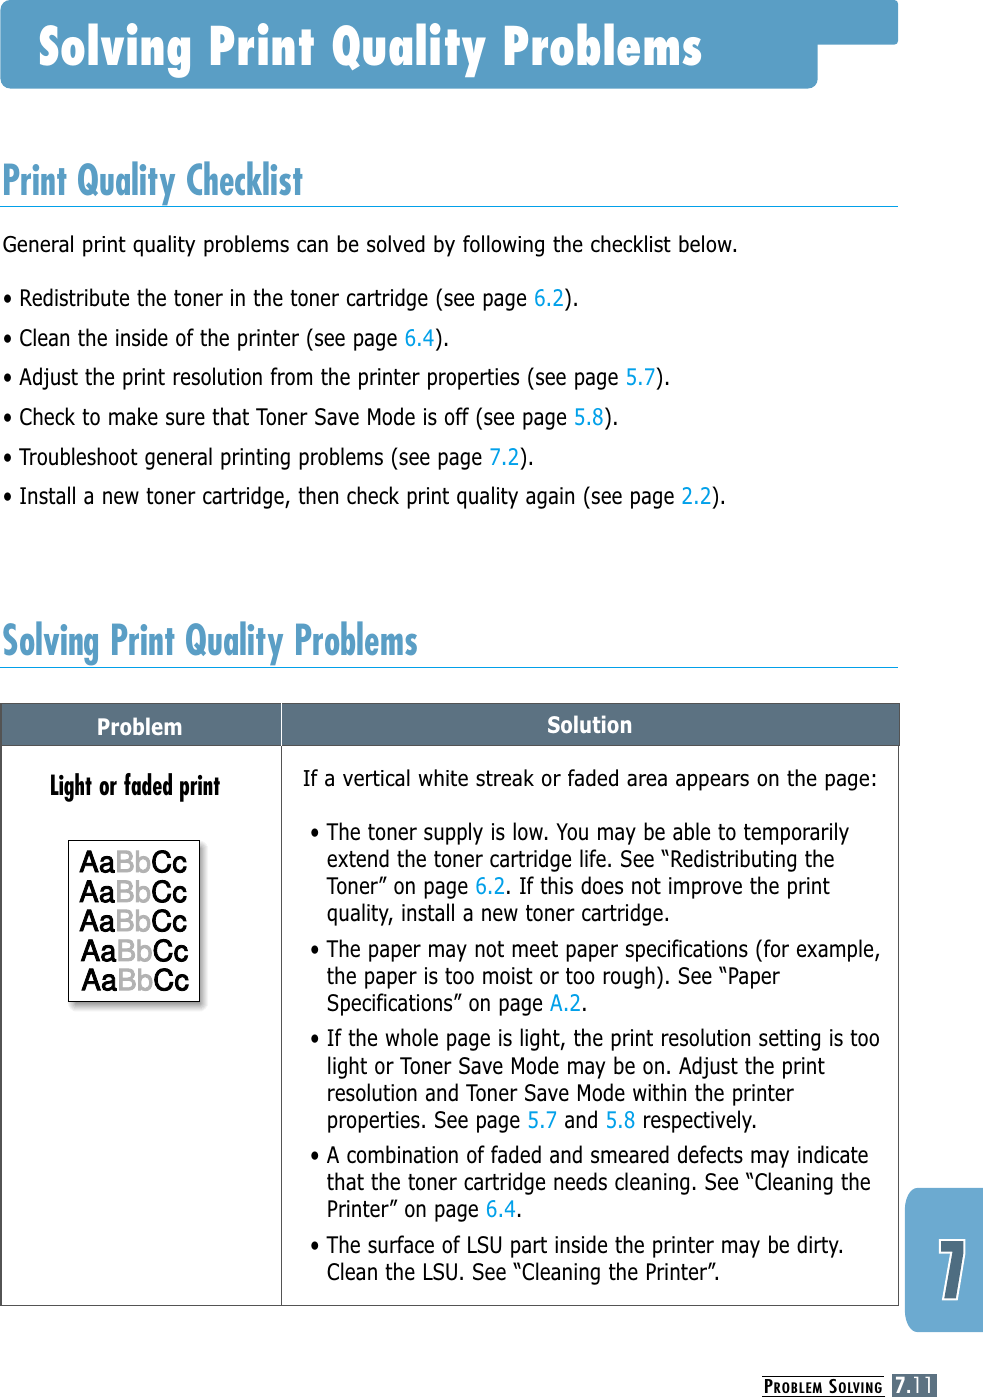 PROBLEM SOLVING7.11Problem SolutionSolving Print Quality ProblemsGeneral print quality problems can be solved by following the checklist below.• Redistribute the toner in the toner cartridge (see page 6.2).• Clean the inside of the printer (see page 6.4).• Adjust the print resolution from the printer properties (see page 5.7).• Check to make sure that Toner Save Mode is off (see page 5.8).• Troubleshoot general printing problems (see page 7.2).• Install a new toner cartridge, then check print quality again (see page 2.2). Print Quality ChecklistSolving Print Quality ProblemsIf a vertical white streak or faded area appears on the page:• The toner supply is low. You may be able to temporarilyextend the toner cartridge life. See “Redistributing theToner” on page 6.2. If this does not improve the printquality, install a new toner cartridge.• The paper may not meet paper specifications (for example,the paper is too moist or too rough). See “PaperSpecifications” on page A.2.• If the whole page is light, the print resolution setting is toolight or Toner Save Mode may be on. Adjust the printresolution and Toner Save Mode within the printerproperties. See page 5.7 and 5.8 respectively.• A combination of faded and smeared defects may indicatethat the toner cartridge needs cleaning. See “Cleaning thePrinter” on page 6.4.• The surface of LSU part inside the printer may be dirty.Clean the LSU. See “Cleaning the Printer”.Light or faded printAaBbCcAaBbCcAaBbCcAaBbCcAaBbCcAaBbCcAaBbCcAaBbCcAaBbCcAaBbCc